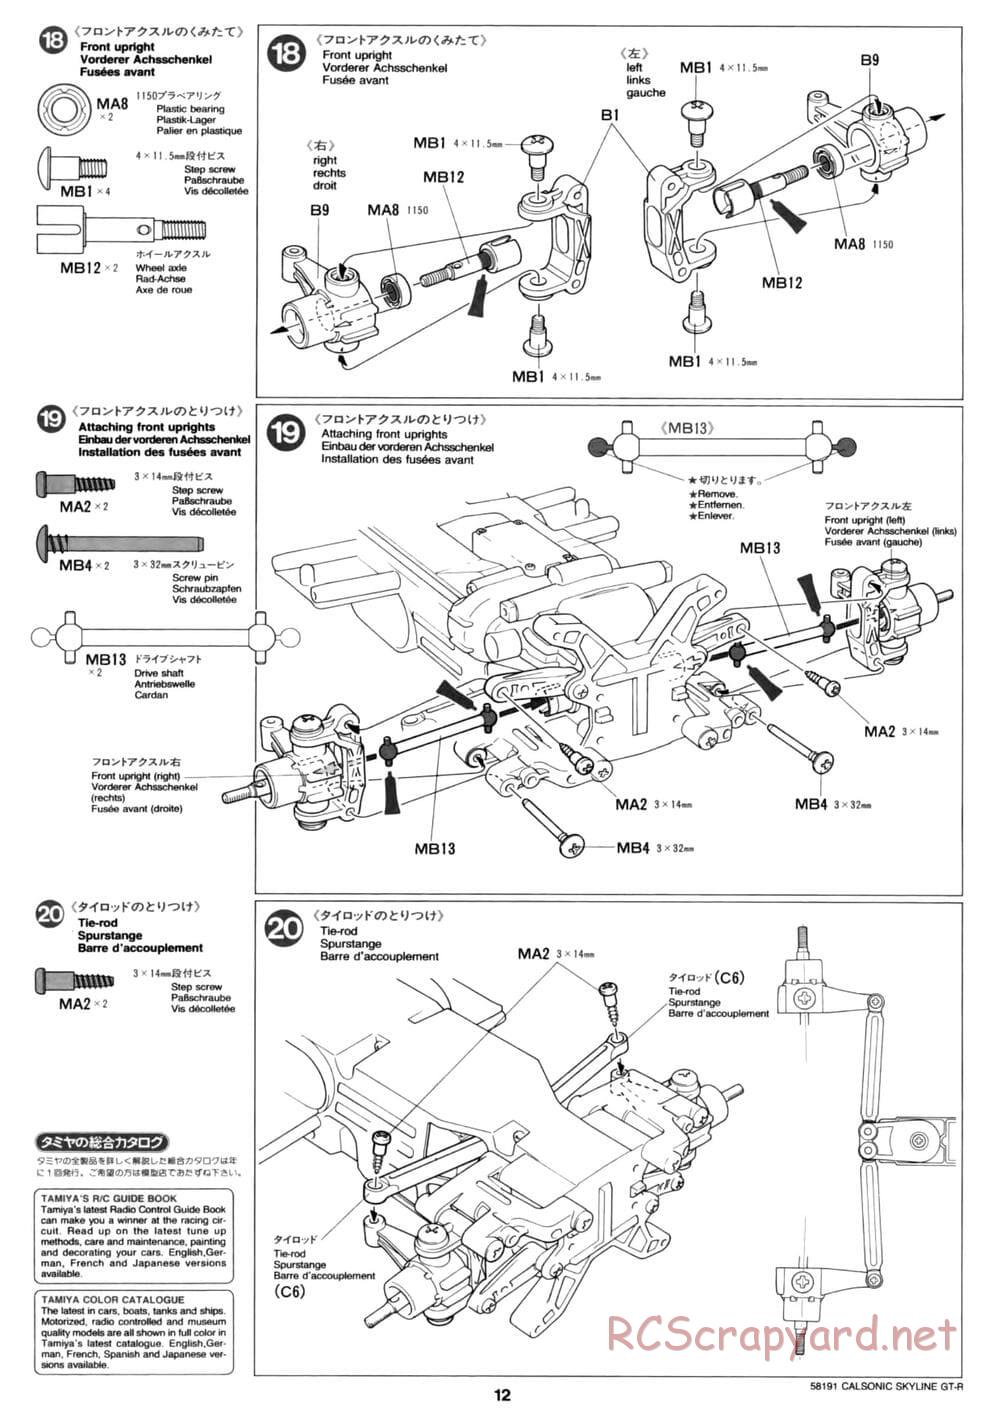 Tamiya - Calsonic Skyline GT-R - TL-01 Chassis - Manual - Page 12